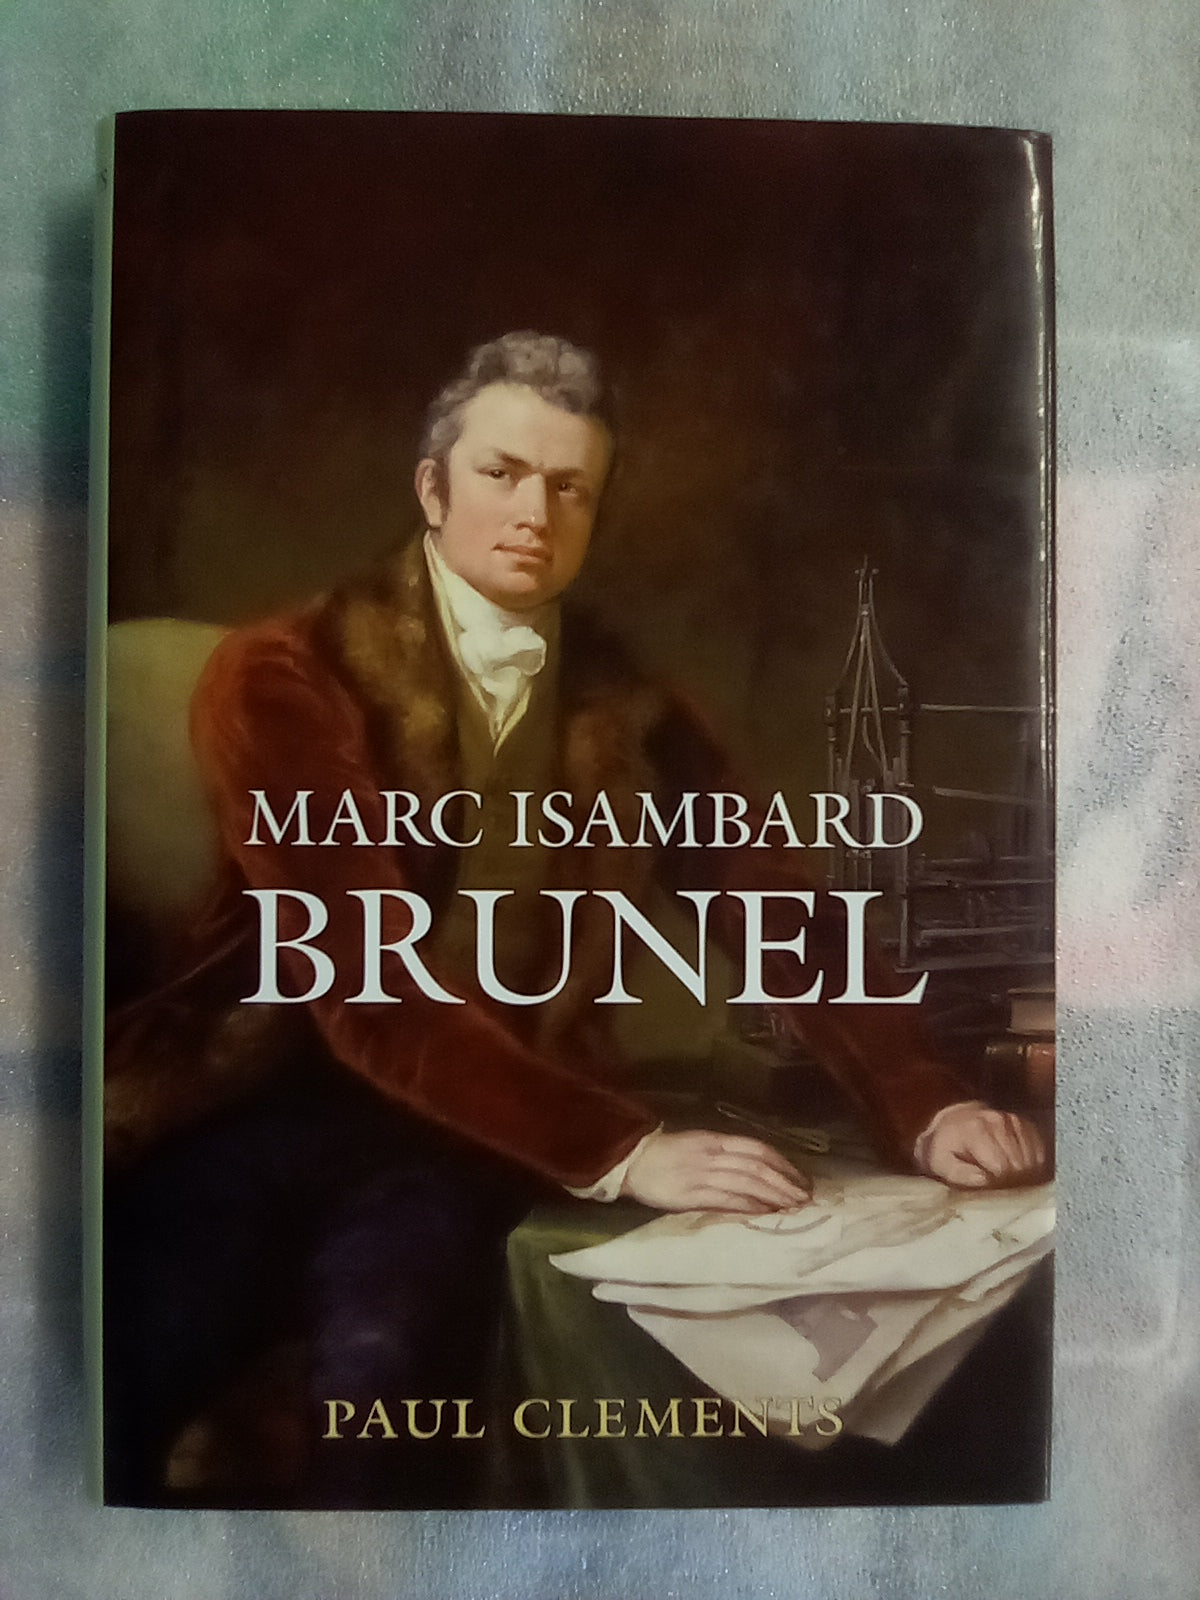 Marc Isambard Brunel by Paul Clements